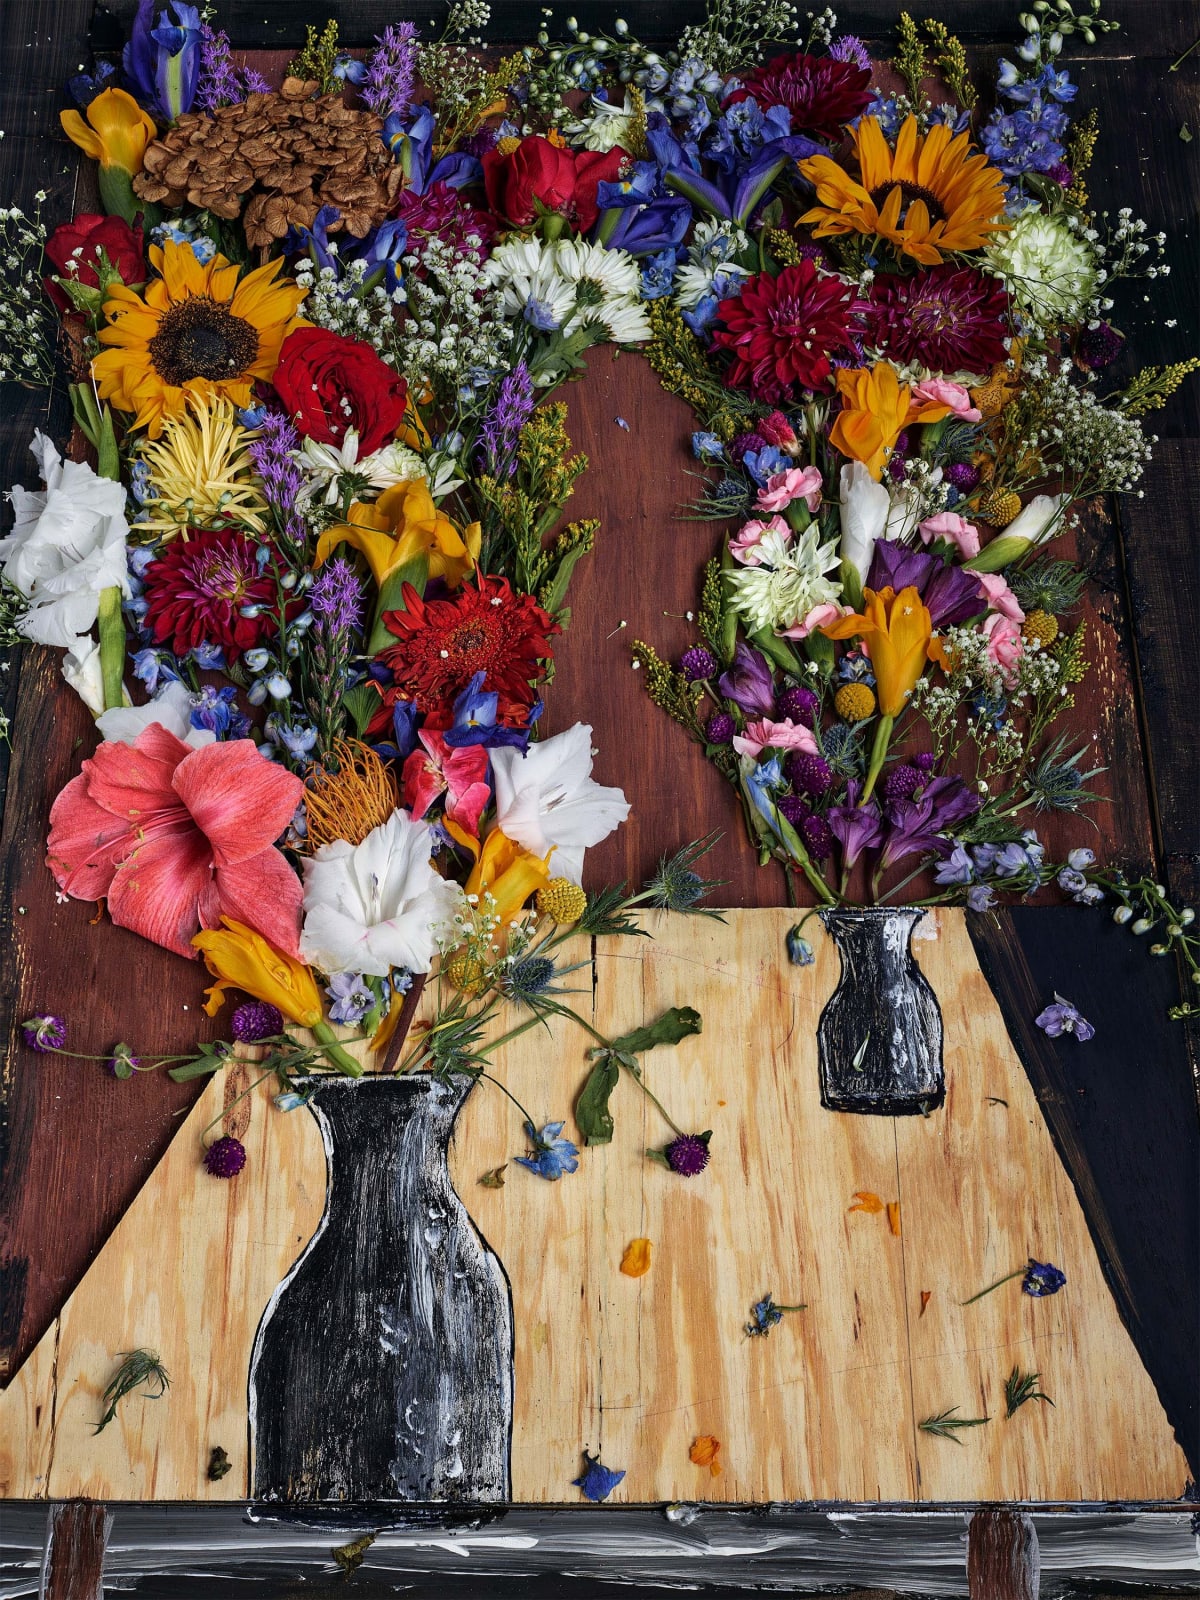 Abelardo Morell Flowers for Lisa #29 two dimensional illusion of two vases of flowers on plywood table background